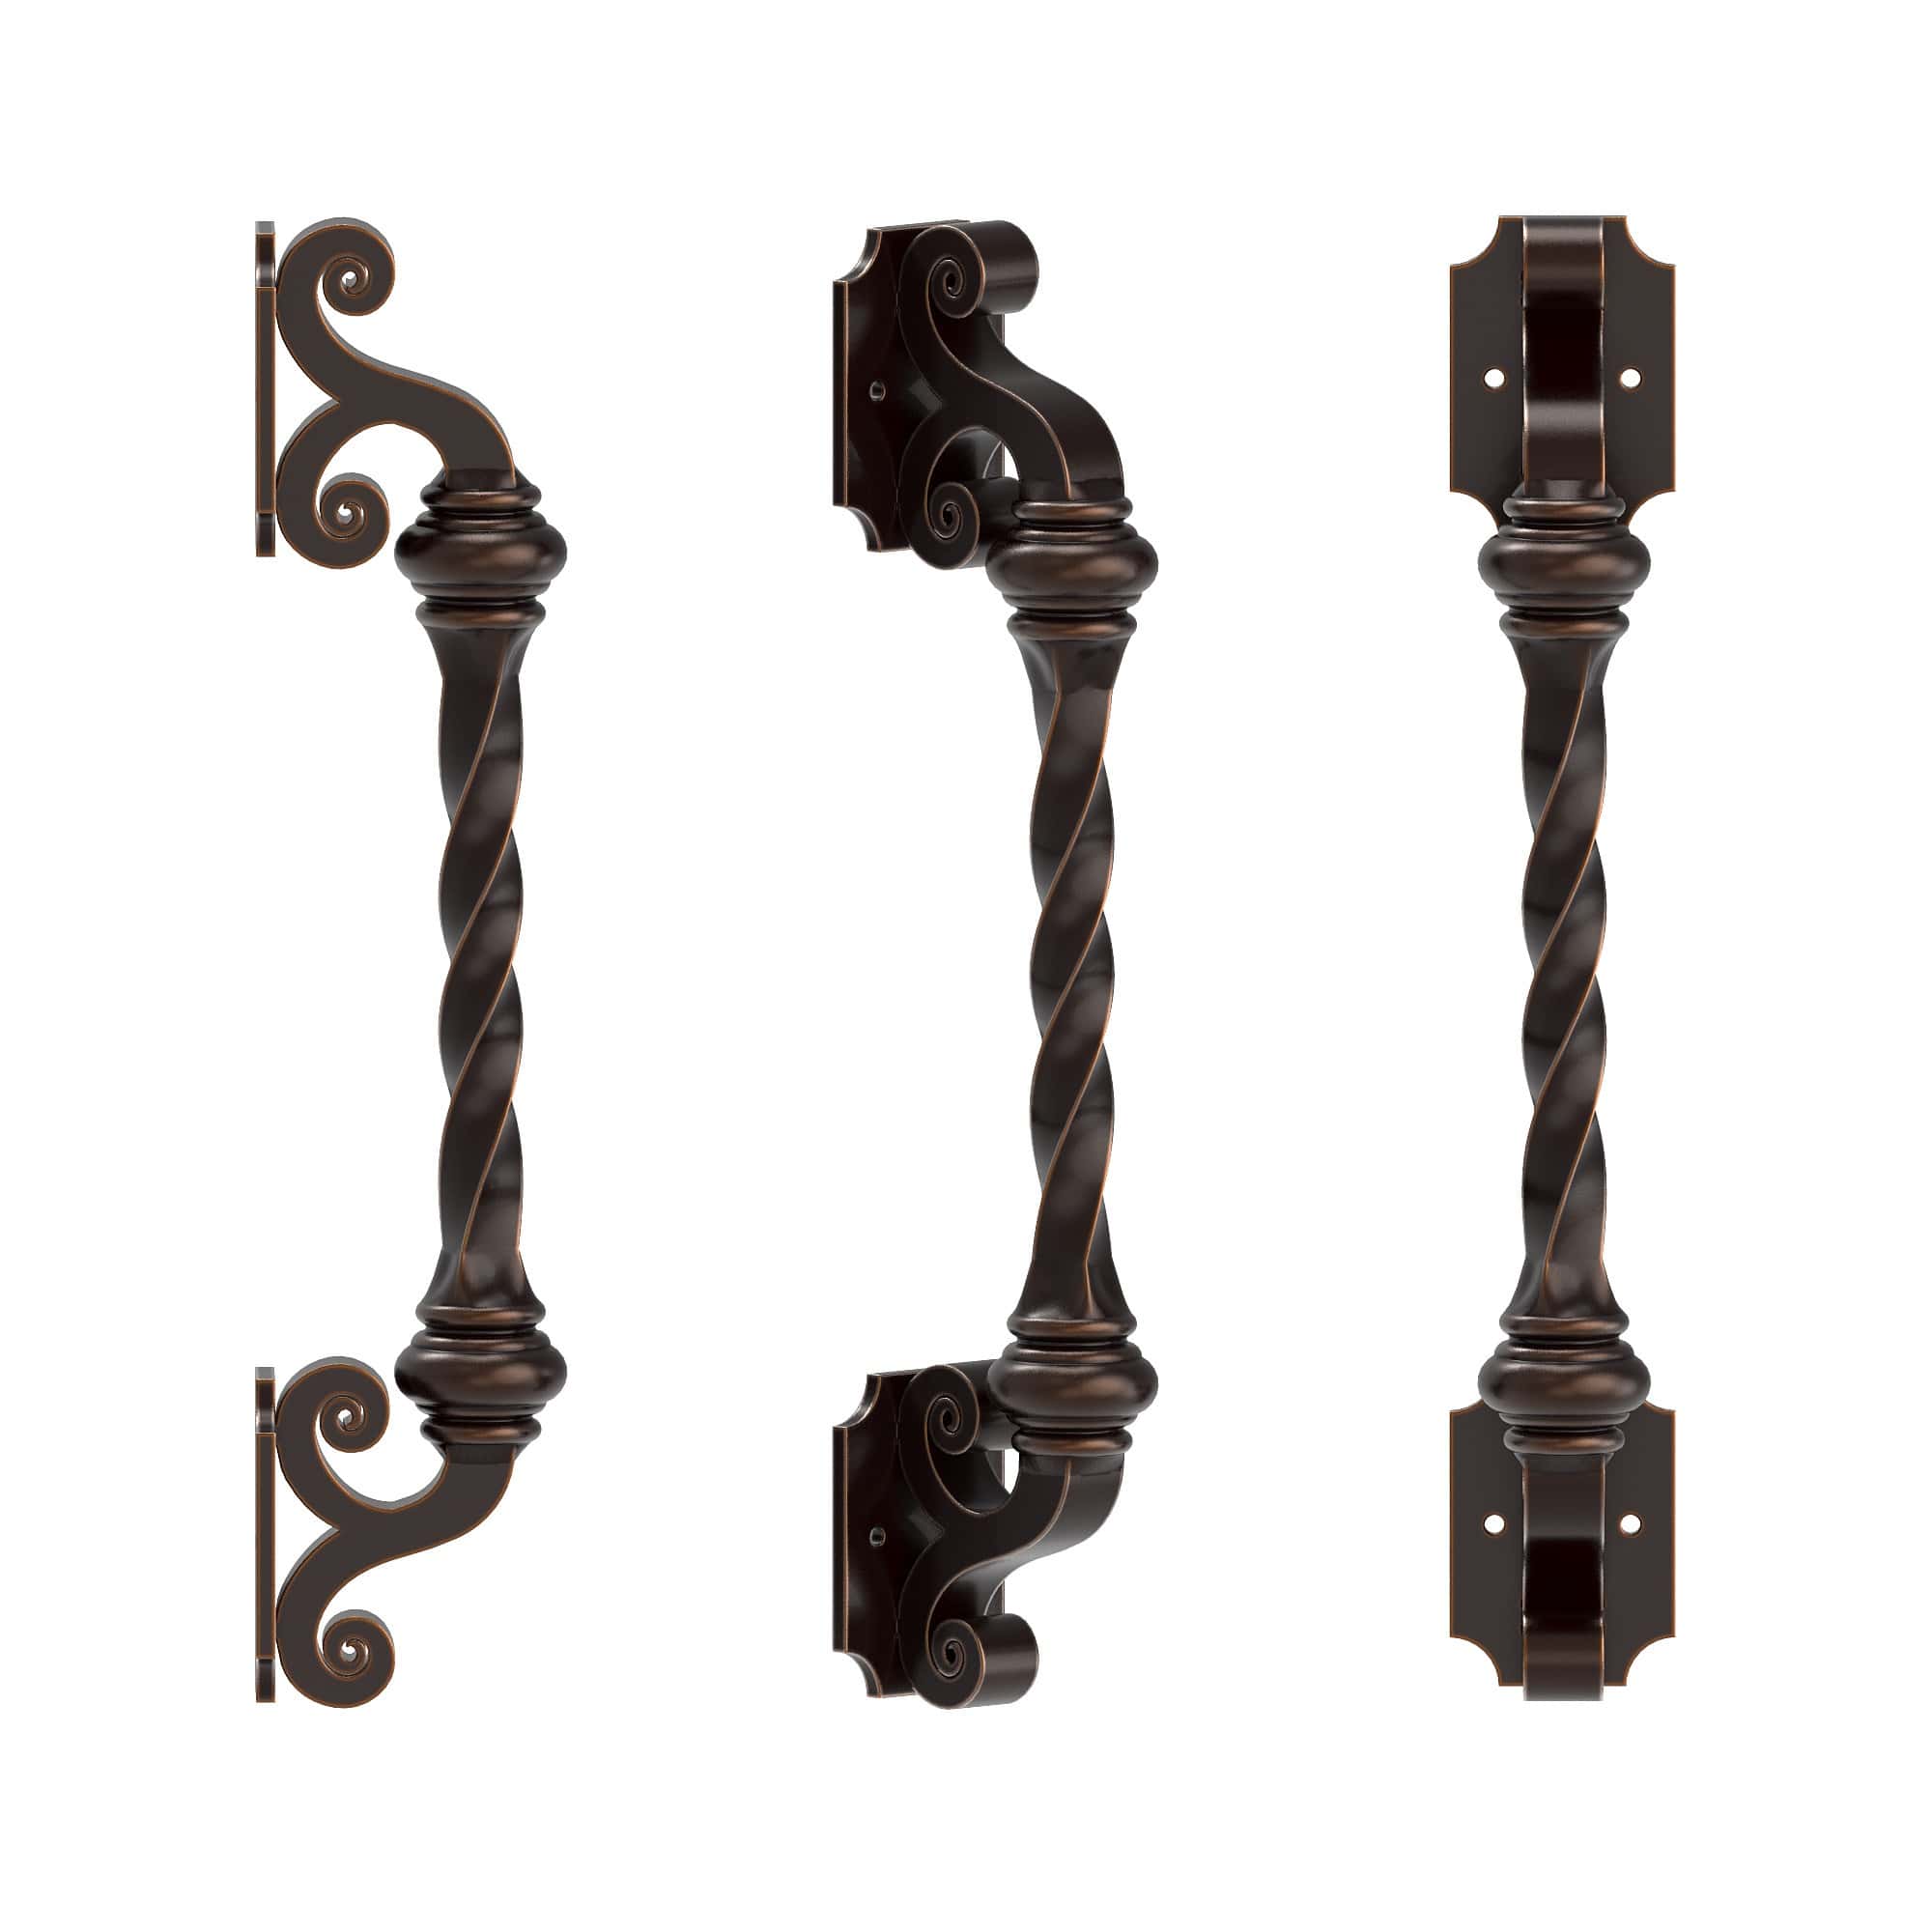 cast iron handles, cast iron handles Suppliers and Manufacturers at